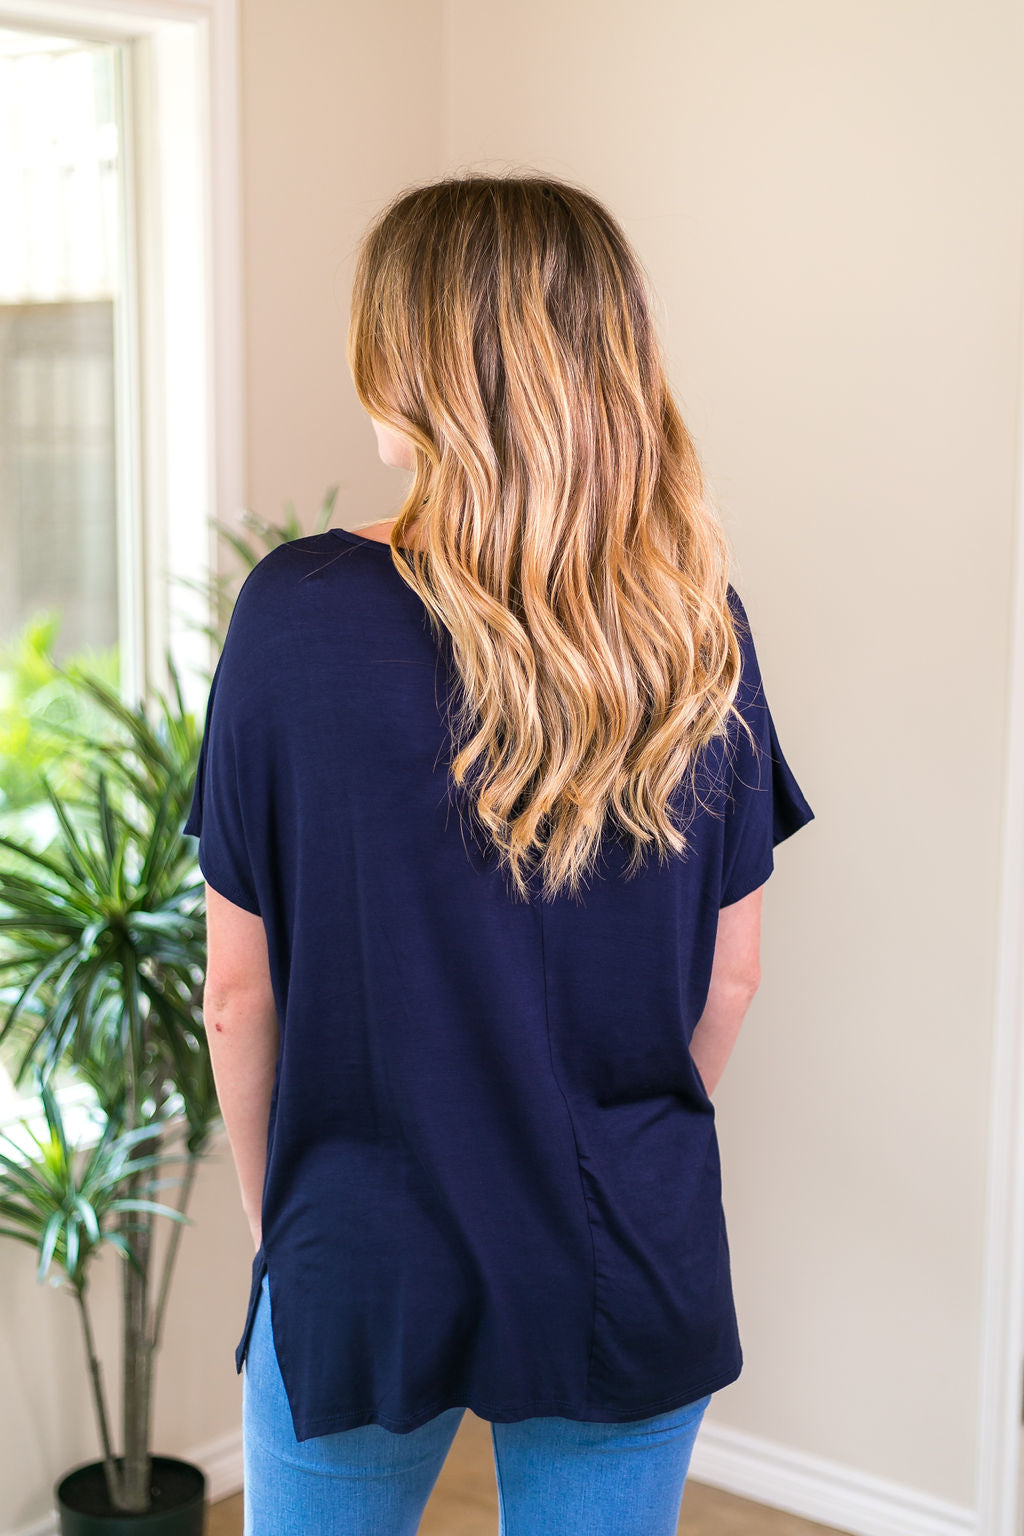 Last Chance Size Small | Everyday Basics Drop Sleeve Solid Piko Top in Navy Blue - Giddy Up Glamour Boutique